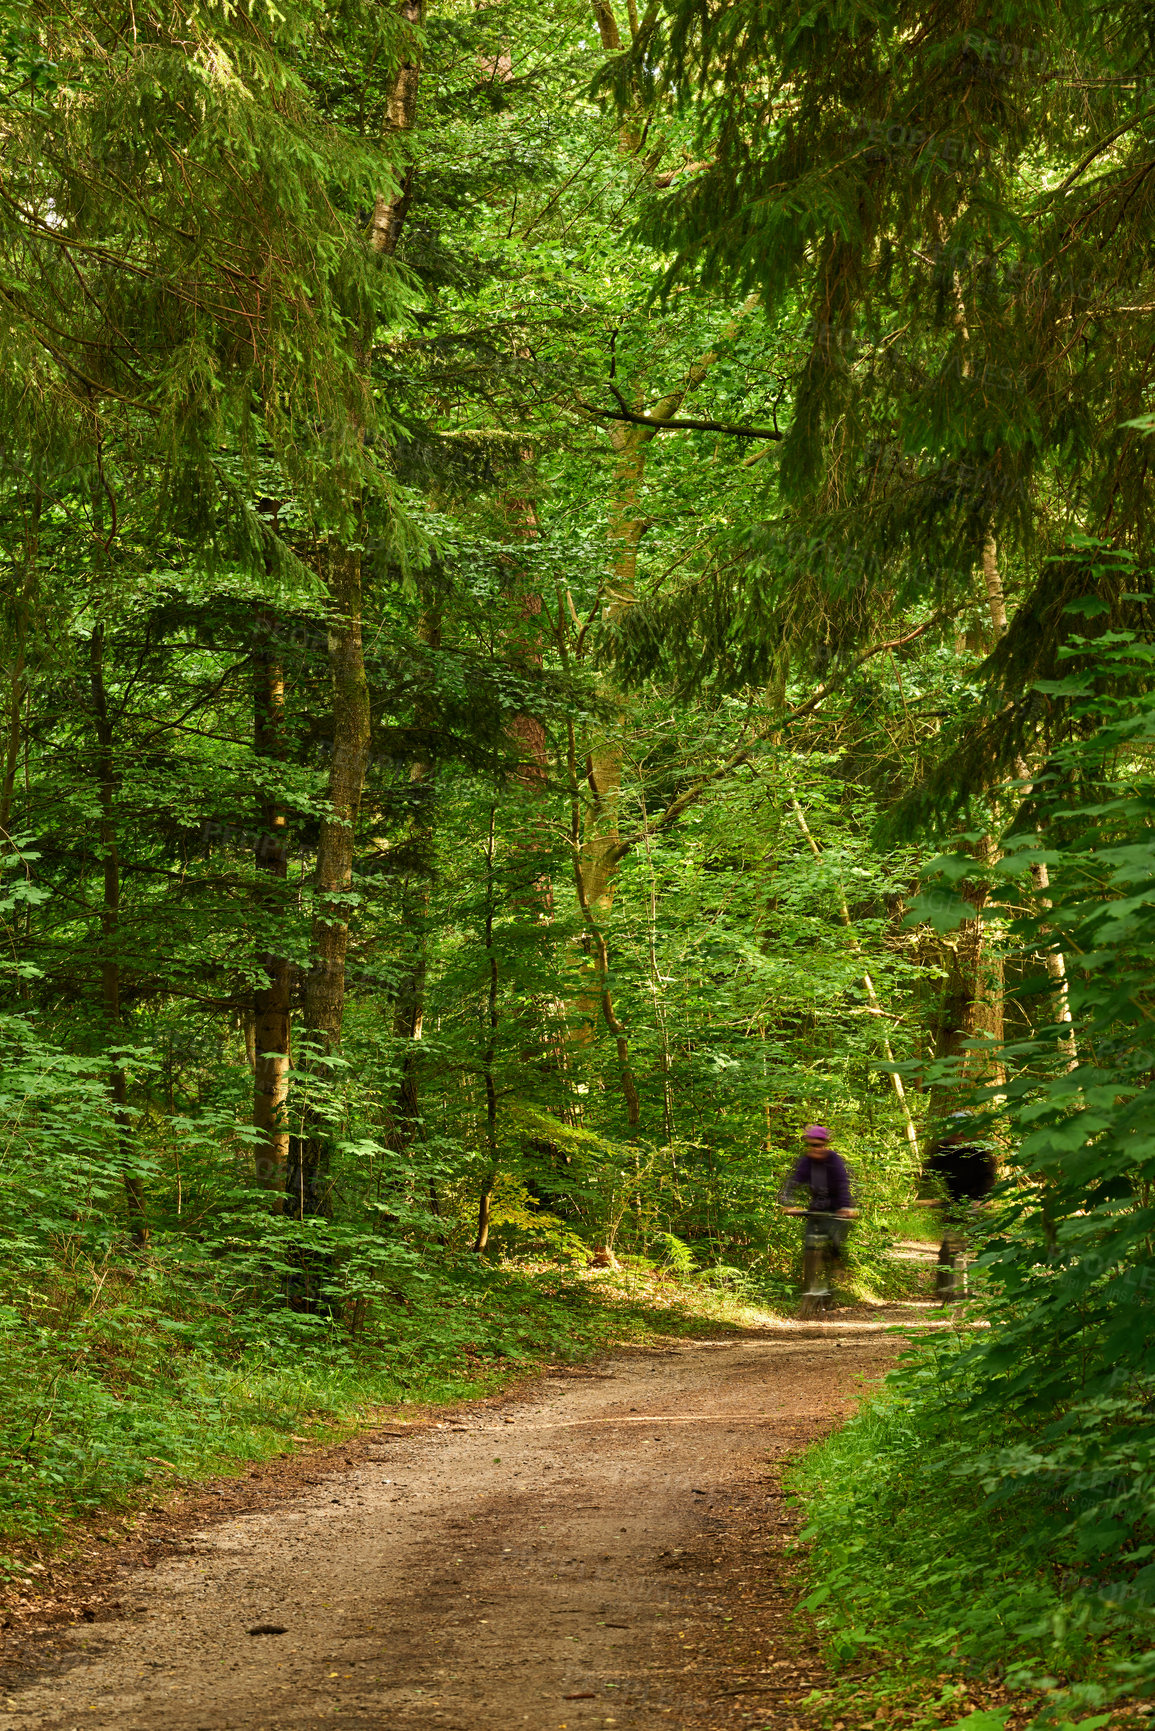 Buy stock photo Two cyclist riding their bikes down a dirt path or road in an uncultivated forest. Exercising and getting fit in the wilderness surrounded by tress and foliage. Athletes working out on their bicycles